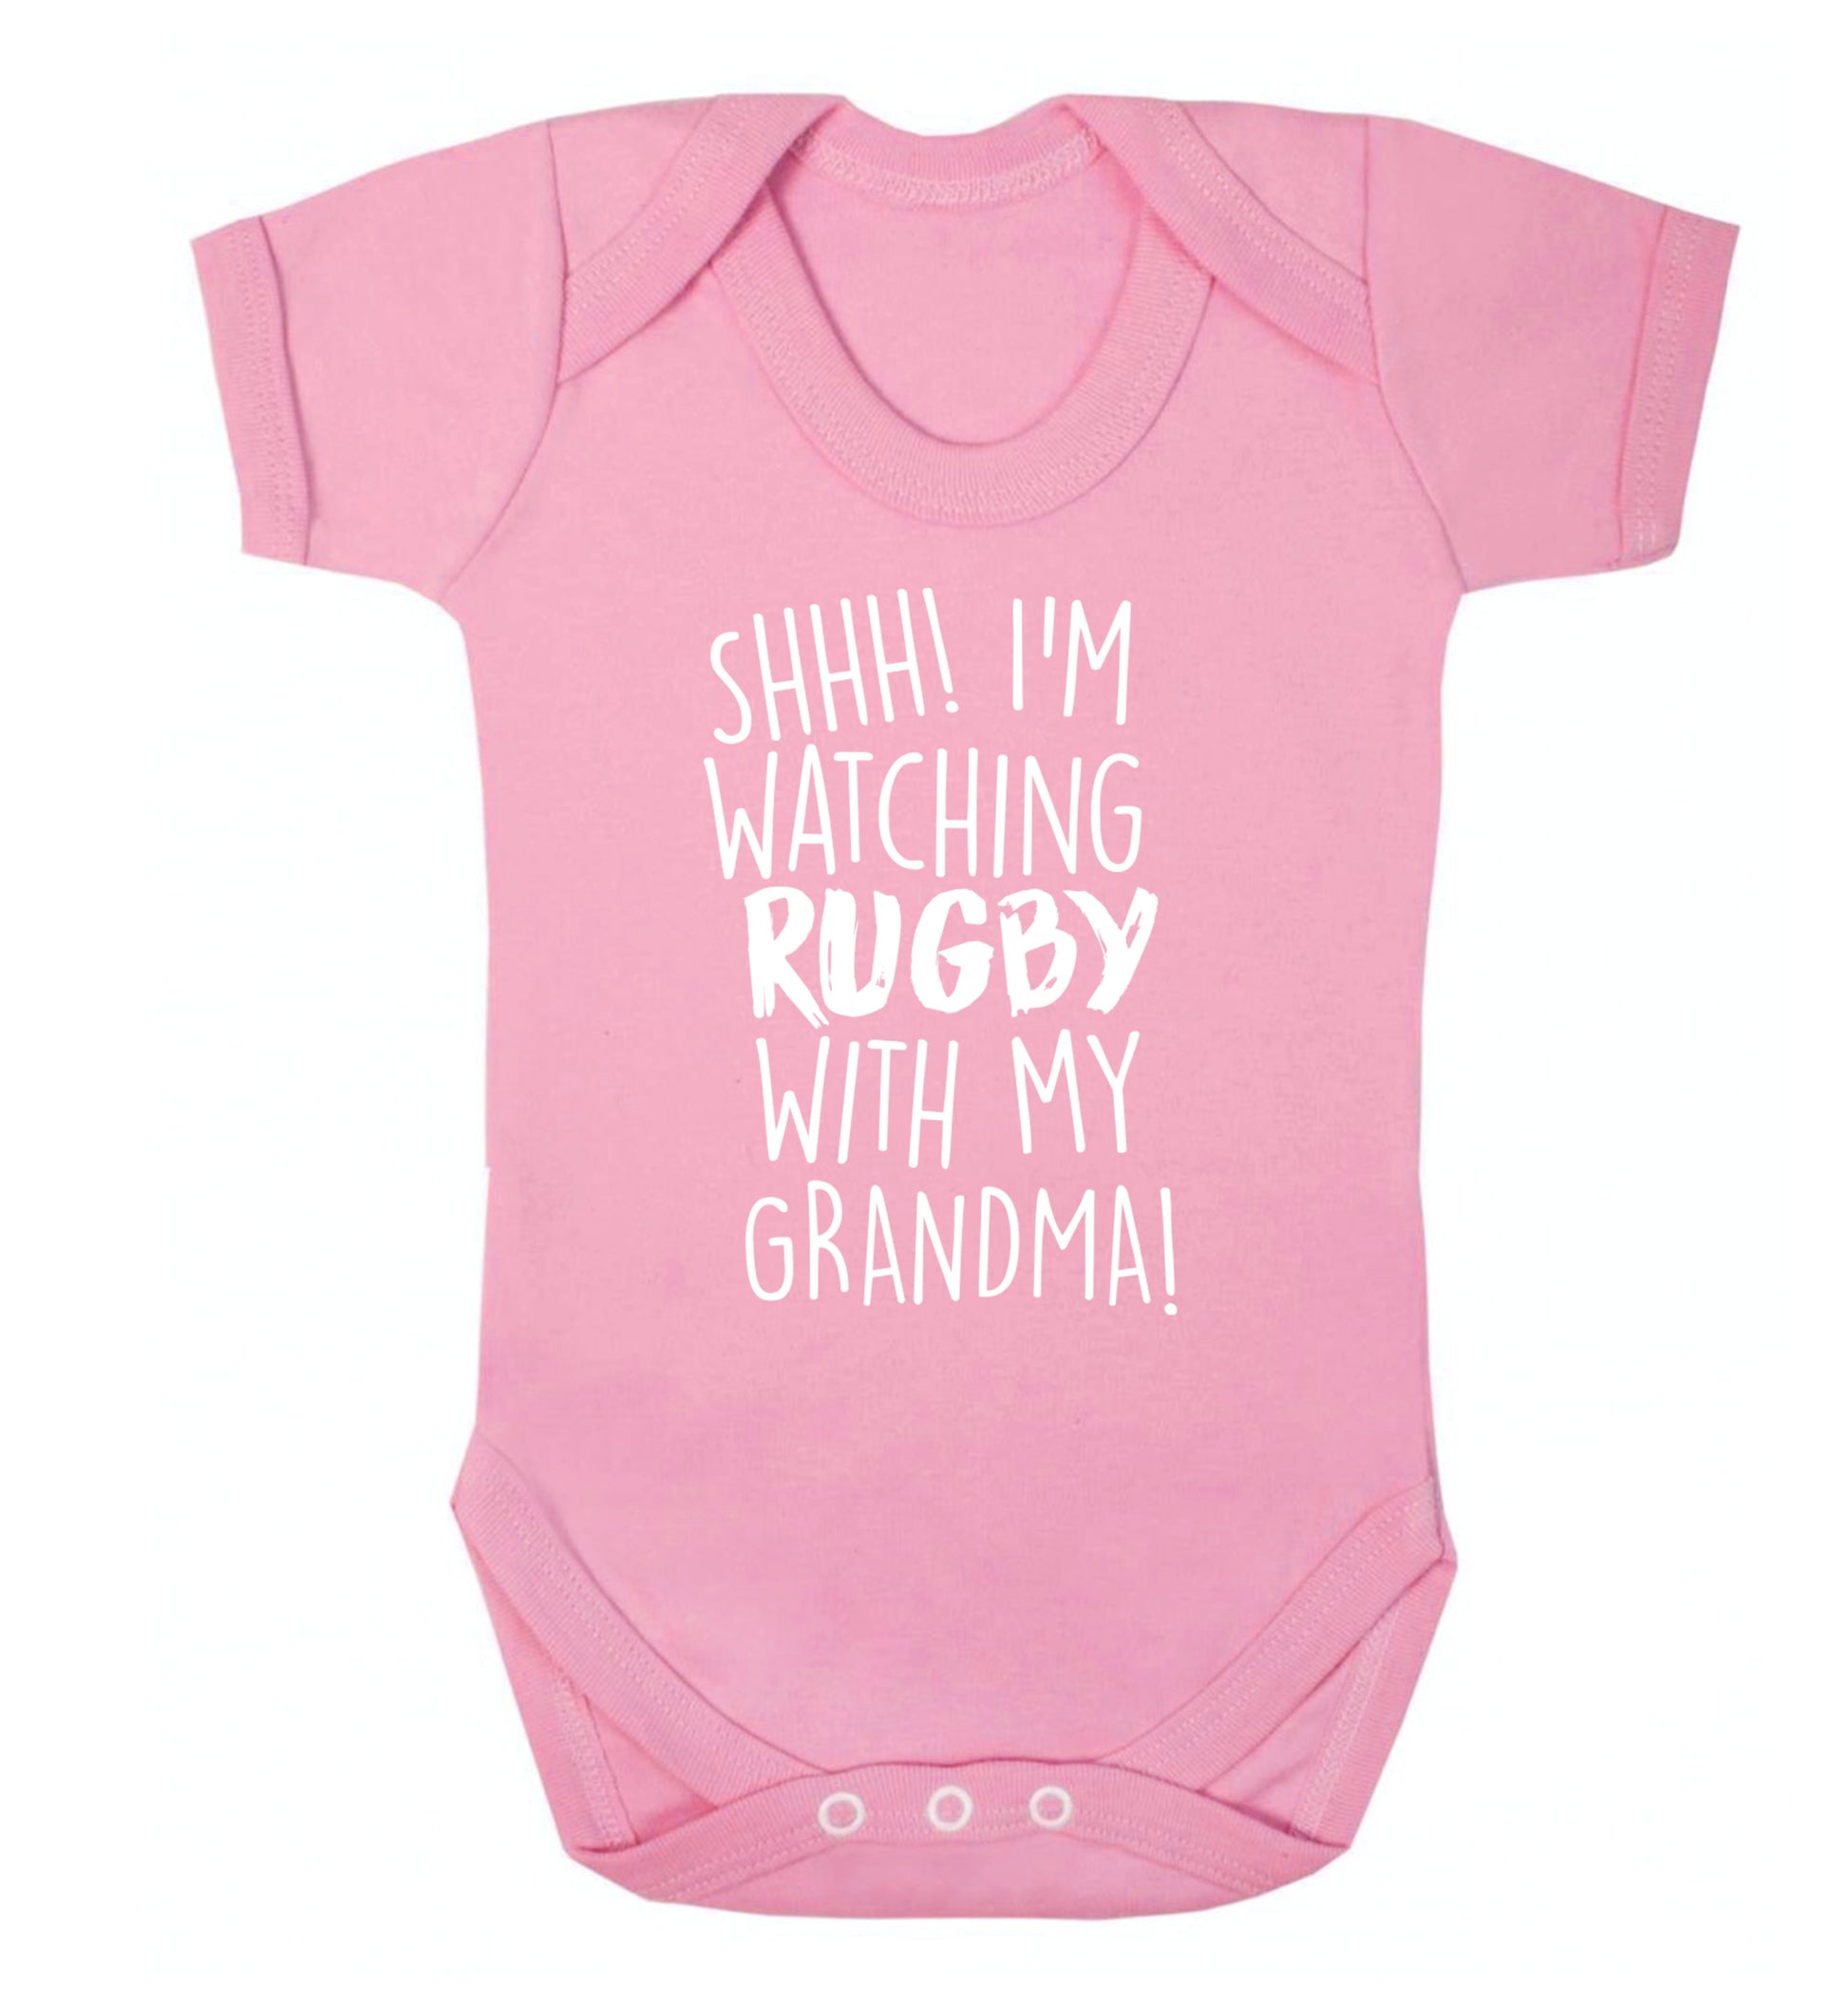 Shh I'm watching rugby with my grandma Baby Vest pale pink 18-24 months